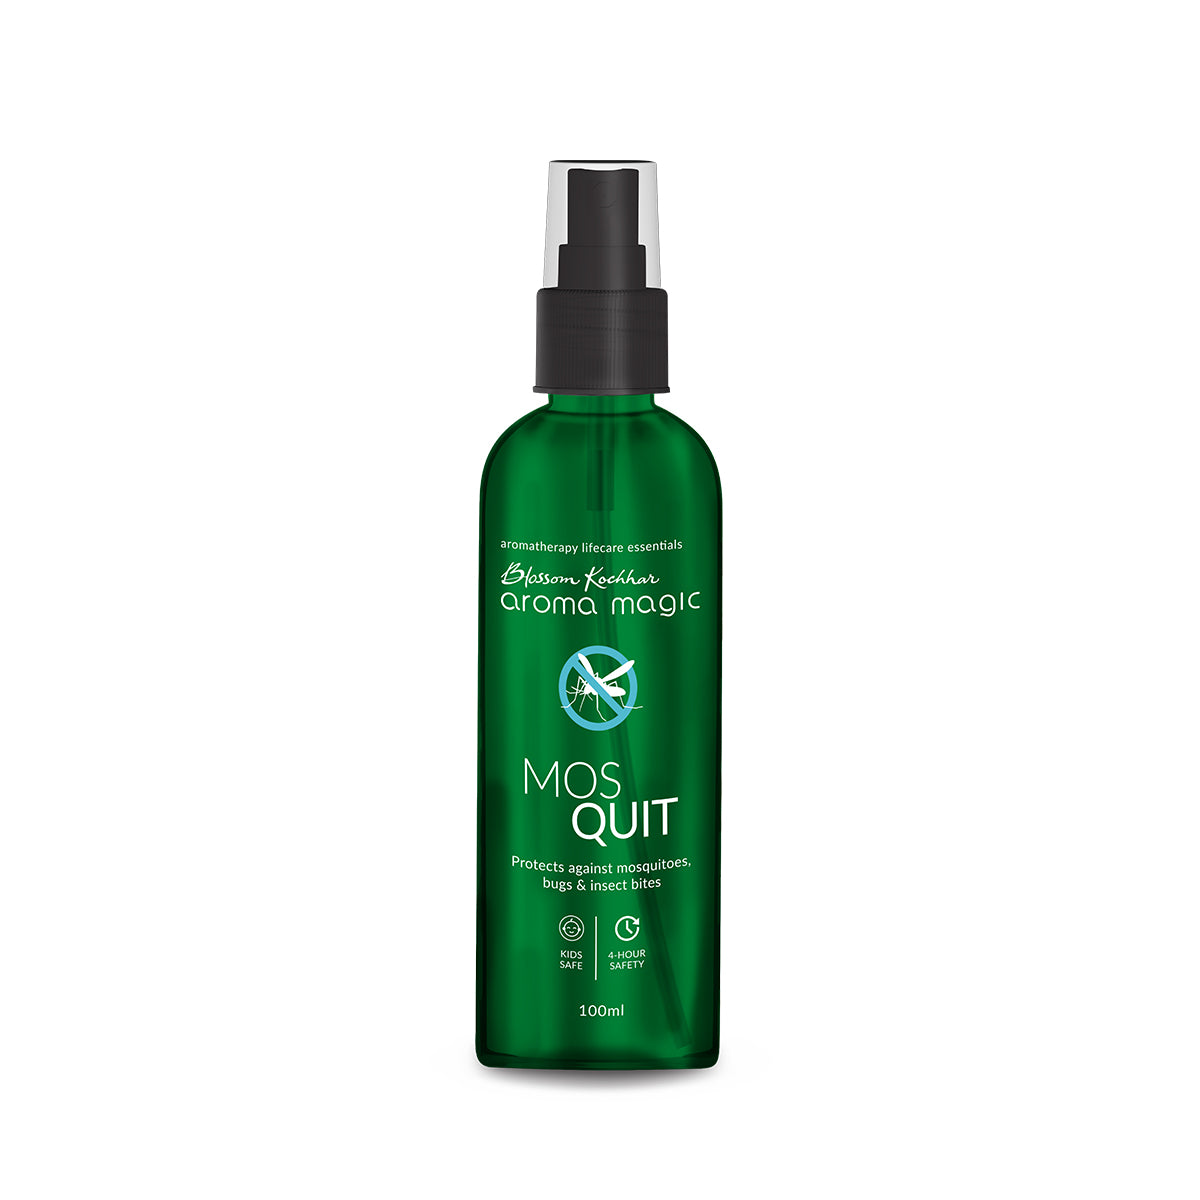 Eco-Friendly Insect Repellent Spray 10mL - First Saturday